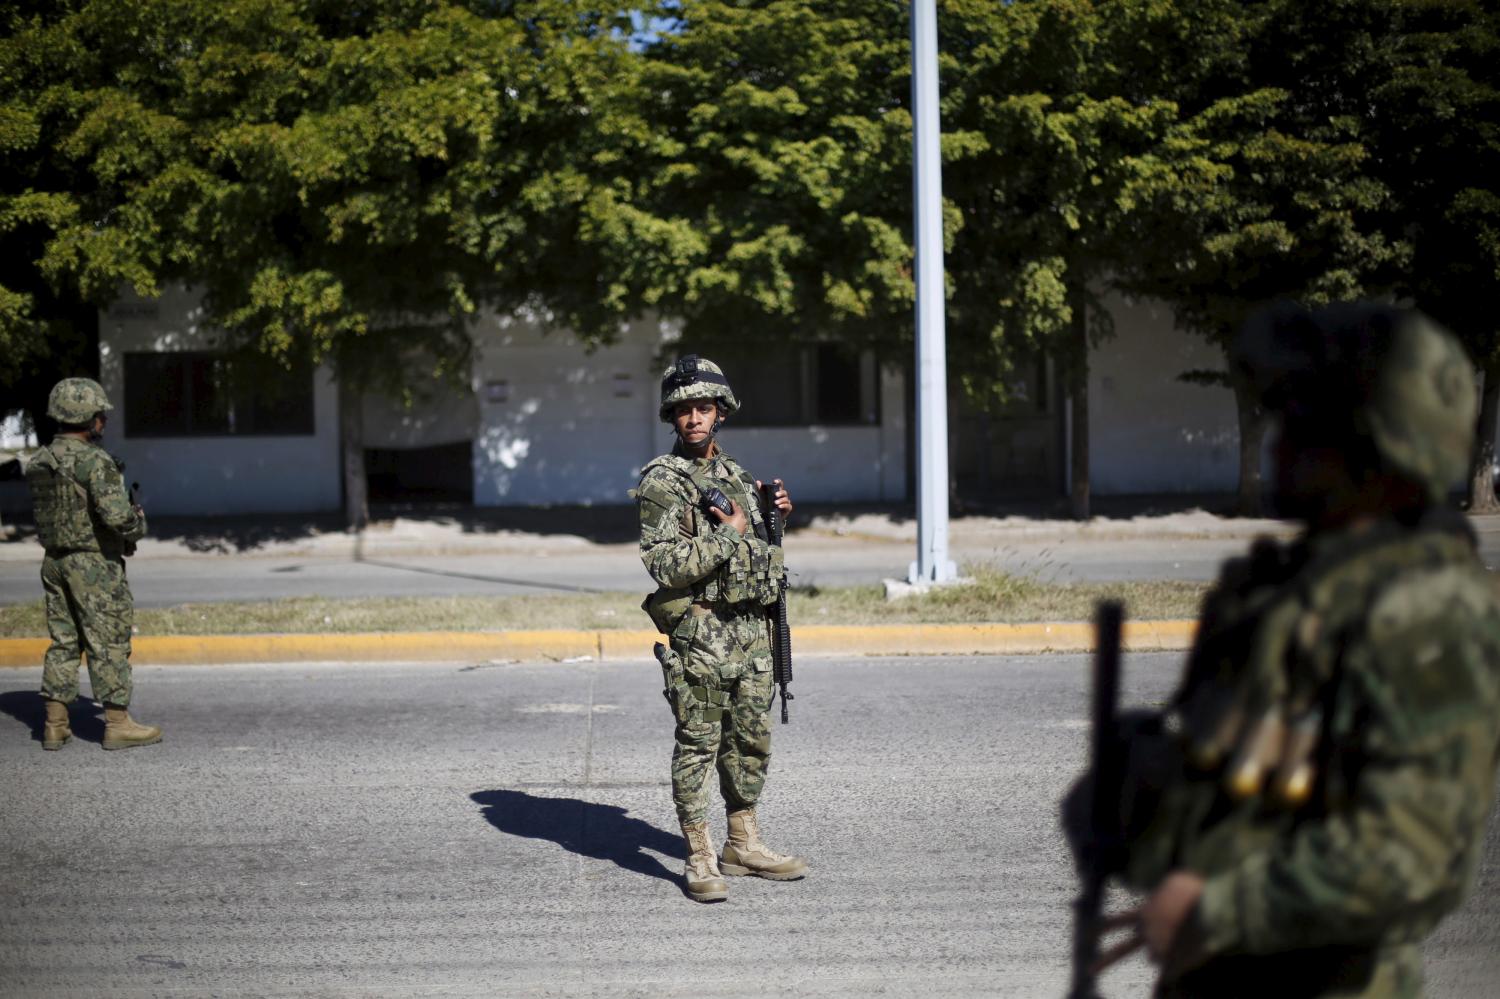 Soldiers stand outside a safe house, where five people were shot dead during an operation on Friday to recapture the world's top drug lord Joaquin "El Chapo" Guzman, at Jiquilpan Boulevard in Los Mochis, in Sinaloa state, Mexico, January 9, 2016. Mexico's government aims to fulfill a request from the United States to extradite the newly-recaptured drug lord Guzman to face drug trafficking charges, sources familiar with the situation said on Saturday. REUTERS/Edgard Garrido